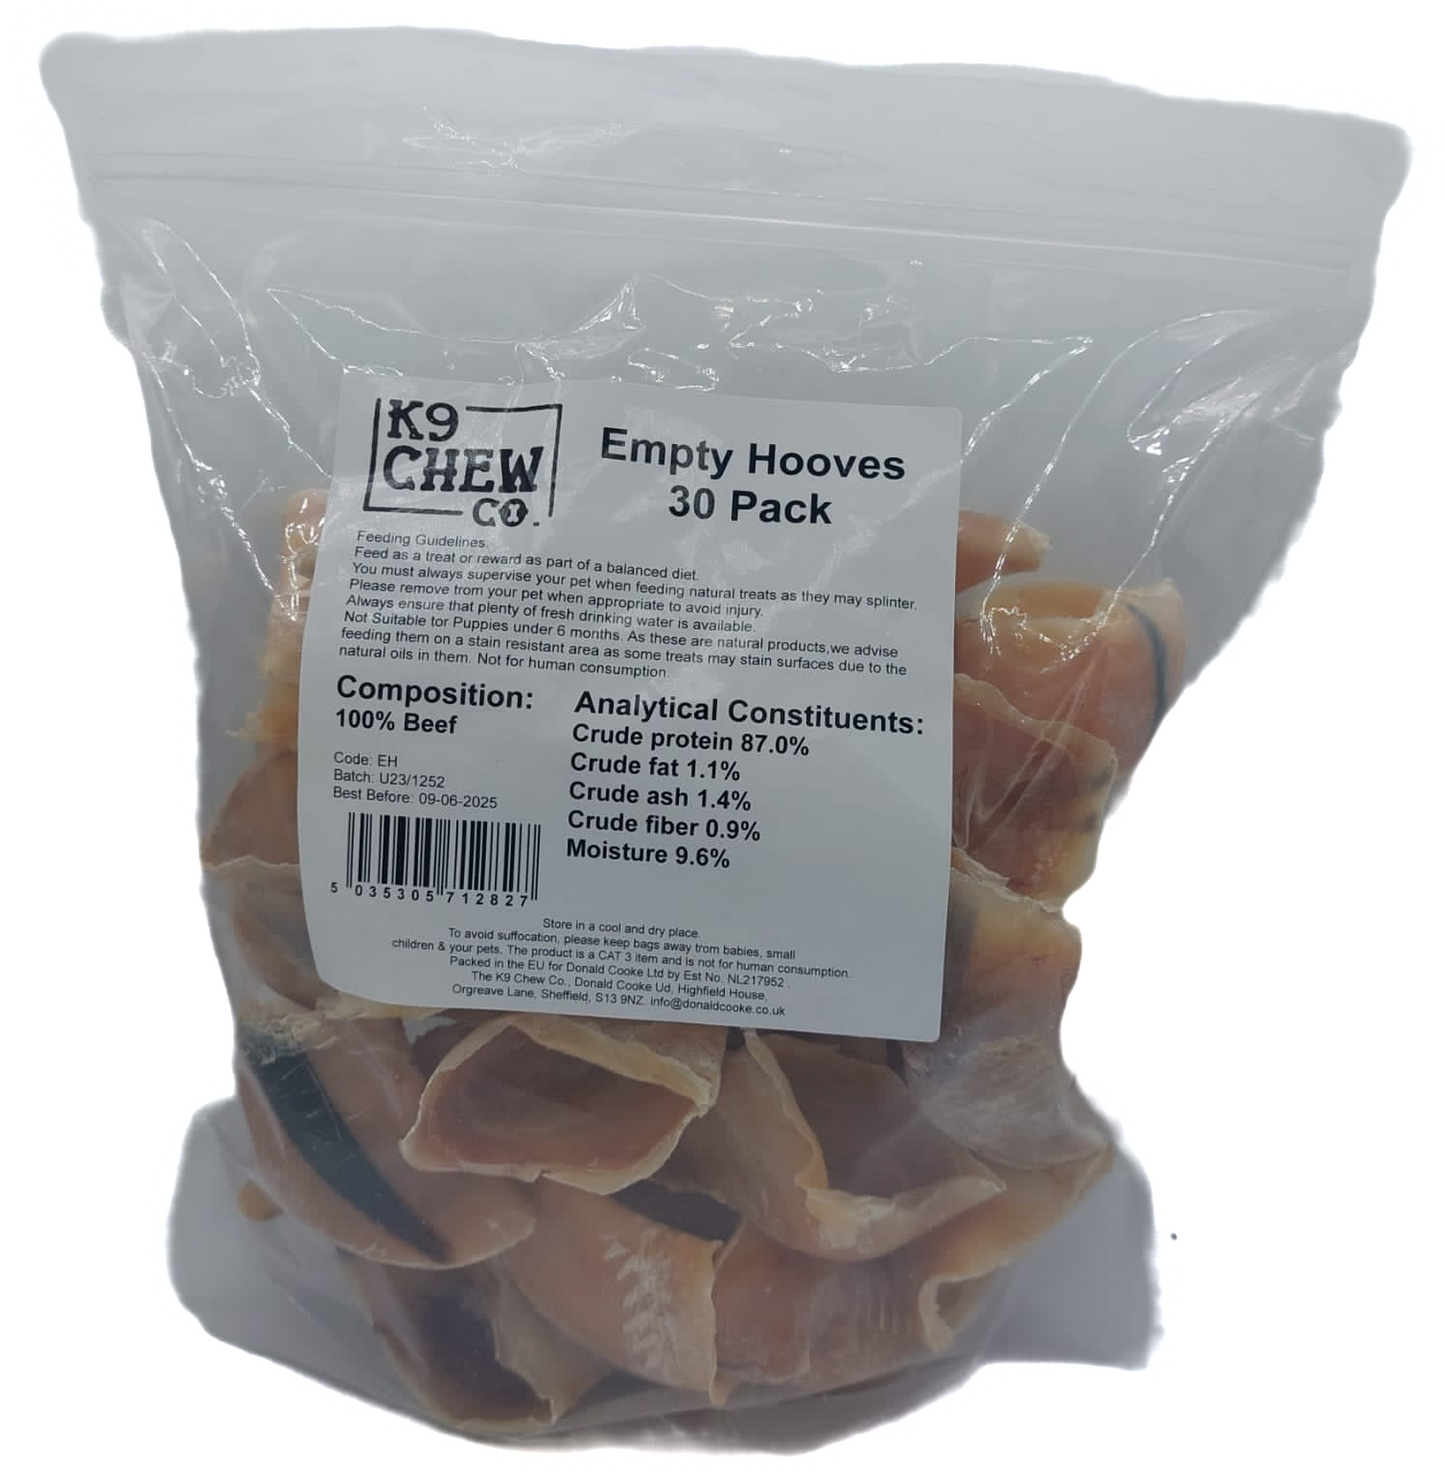 K9 Chew Co. Cow Hooves Empty Pack of 30